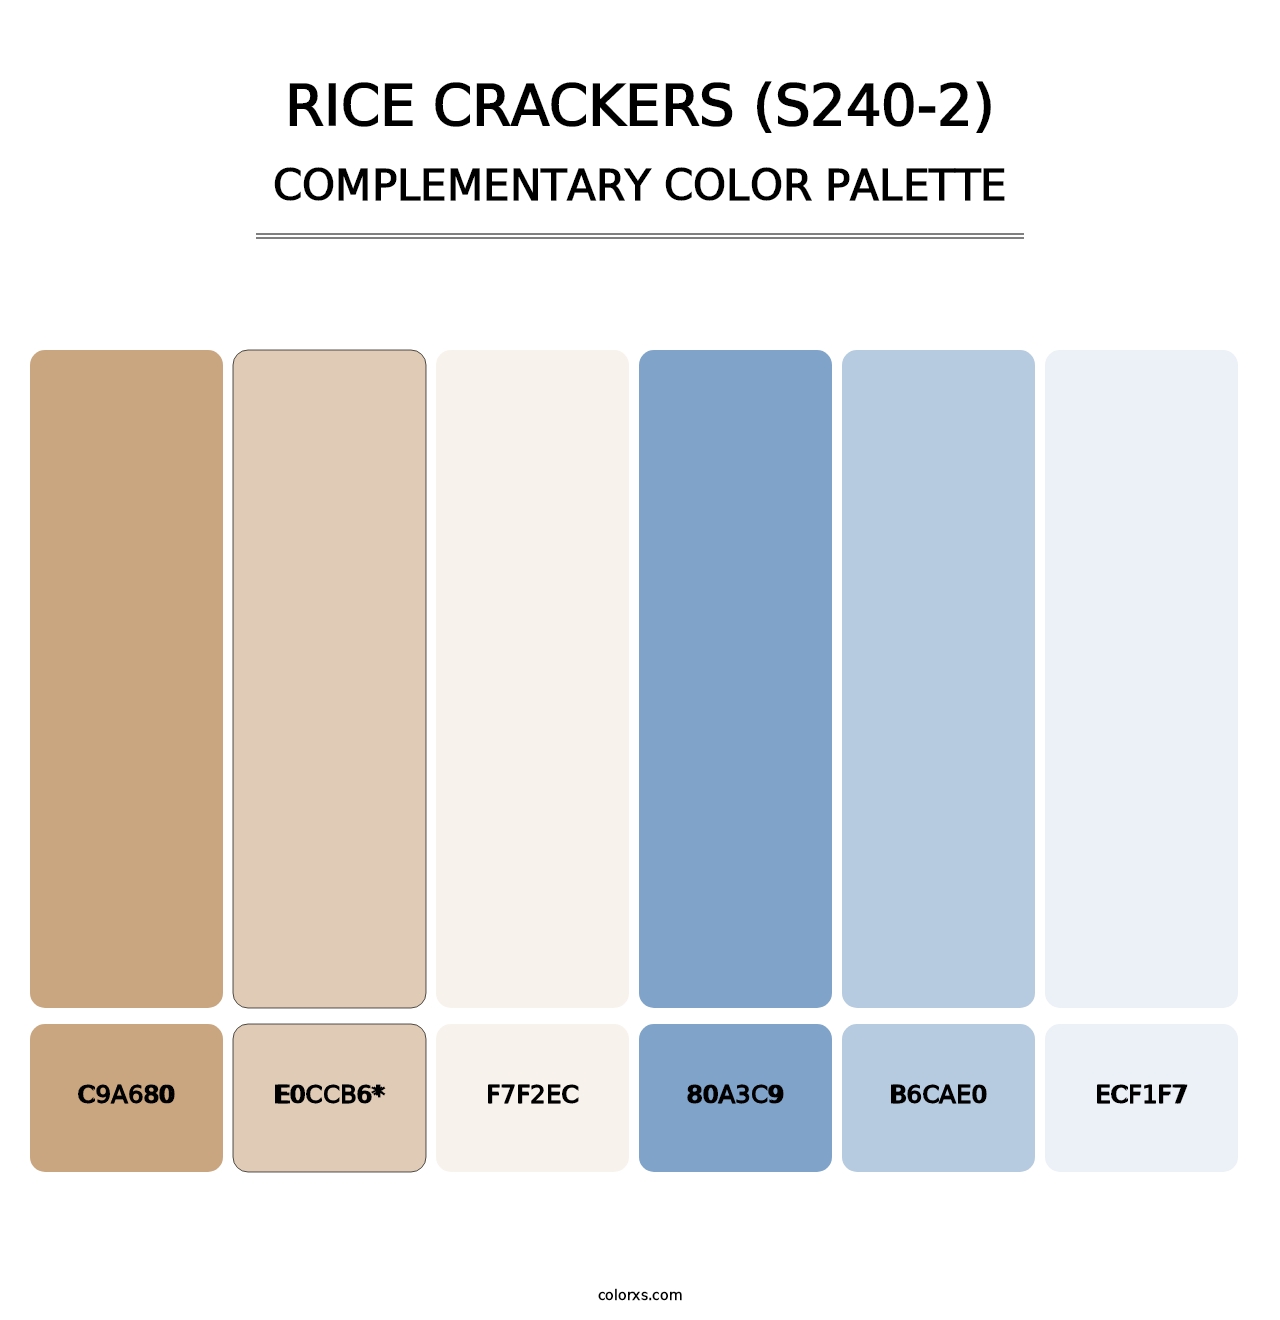 Rice Crackers (S240-2) - Complementary Color Palette